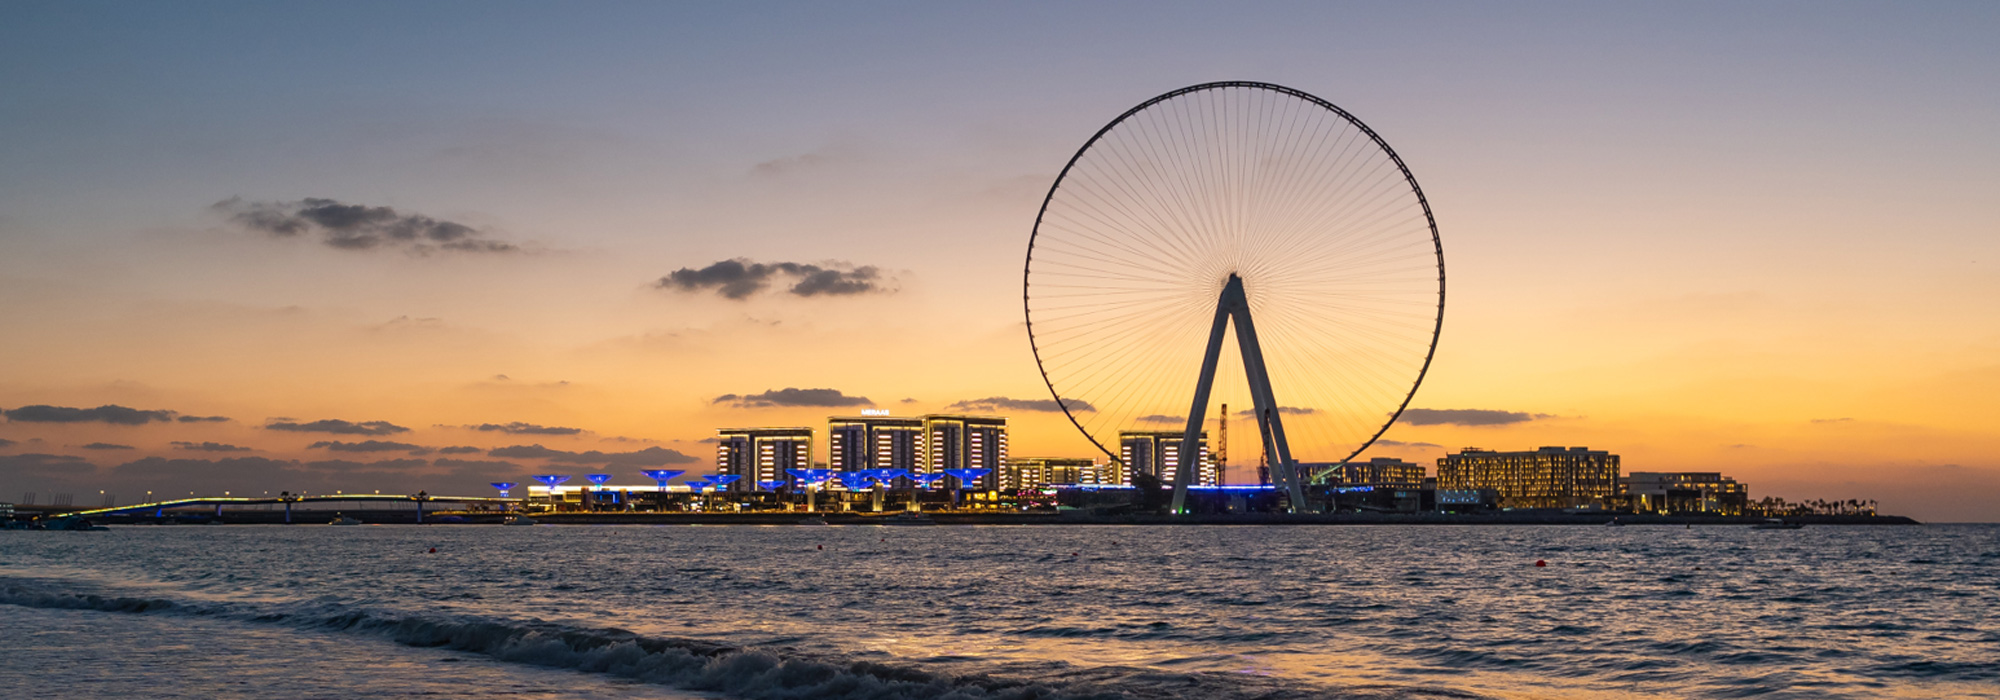 Ain Dubai All Tickets Info About The Giant Observation Wheel